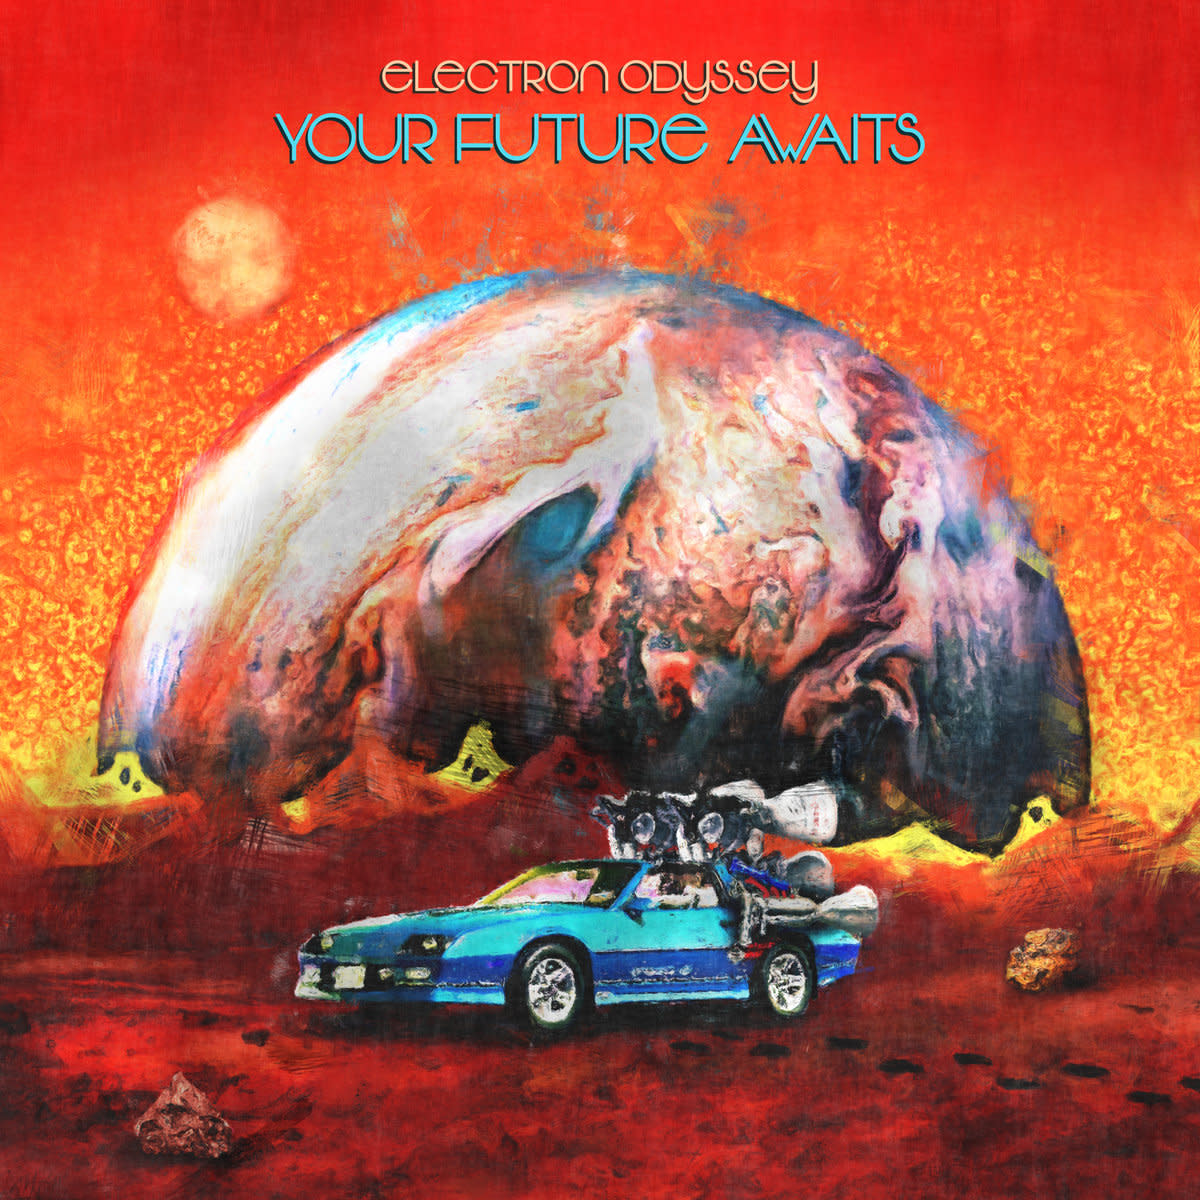 synth-album-review-your-future-awaits-by-electron-odyssey